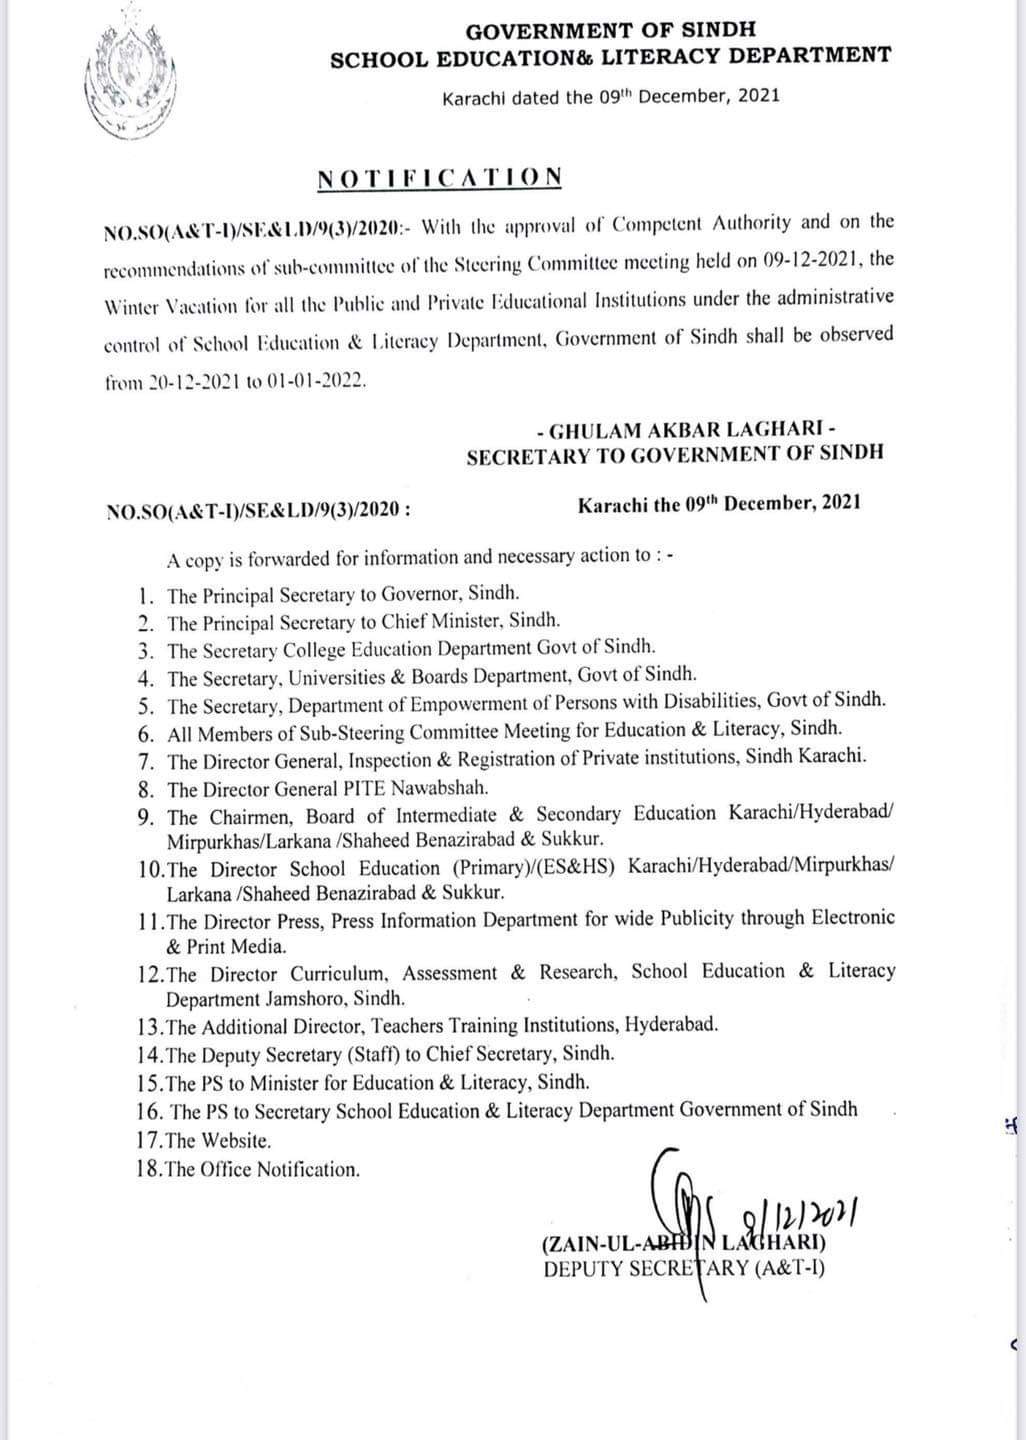 Government of Sindh Is Going To Announce Winter Vacations